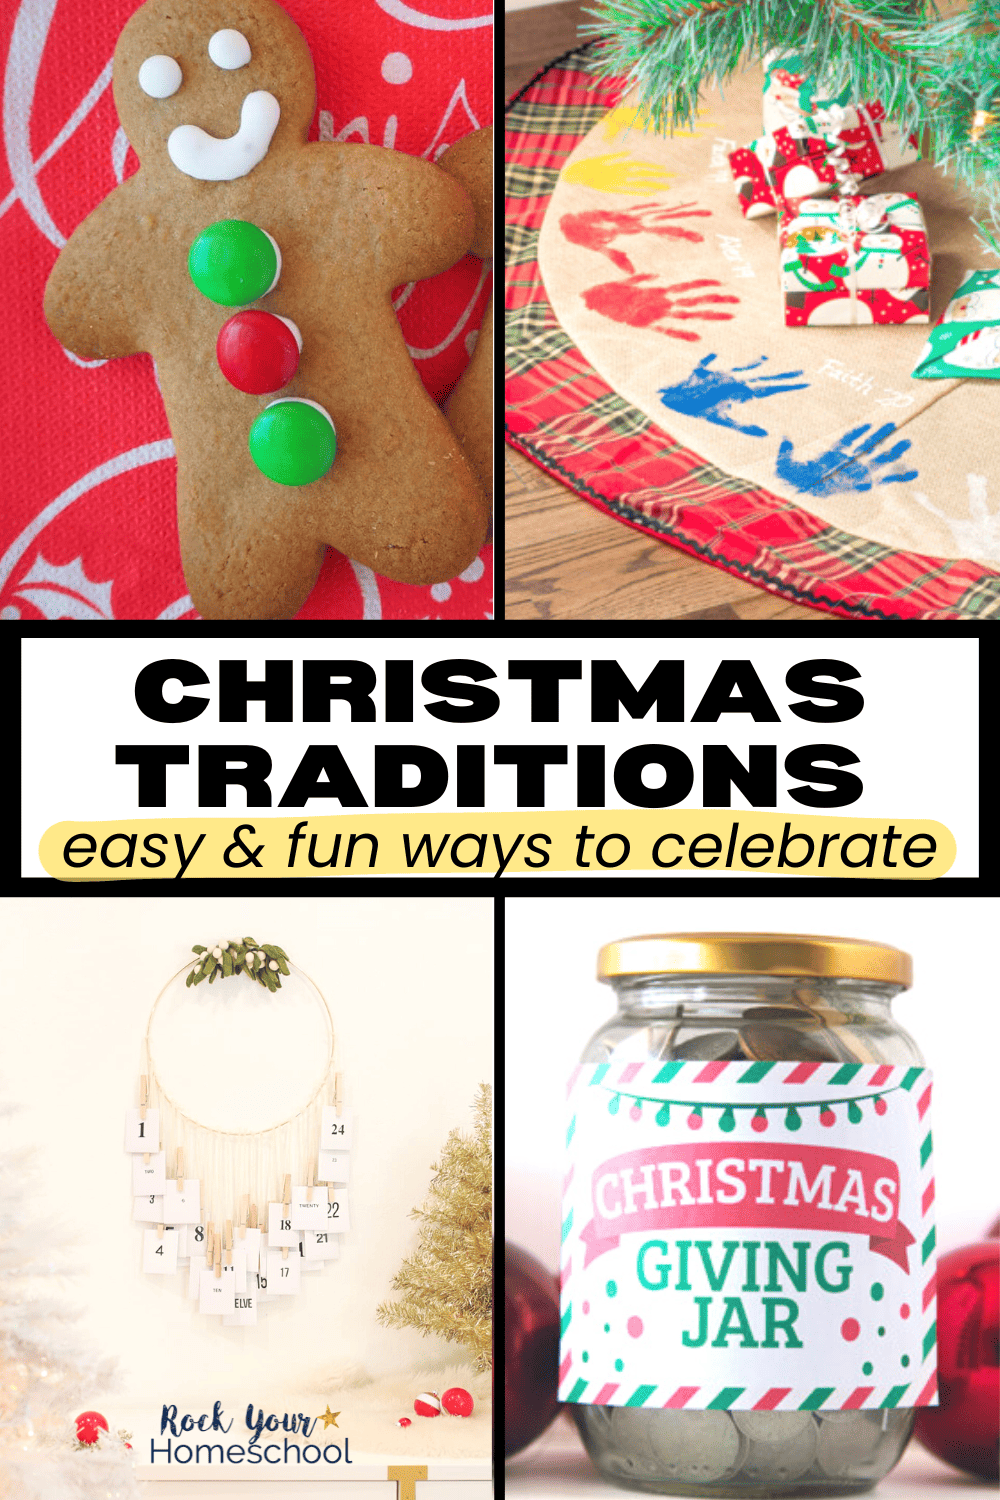 Christmas Traditions with Kids: 15 Best Ideas for Holiday Fun